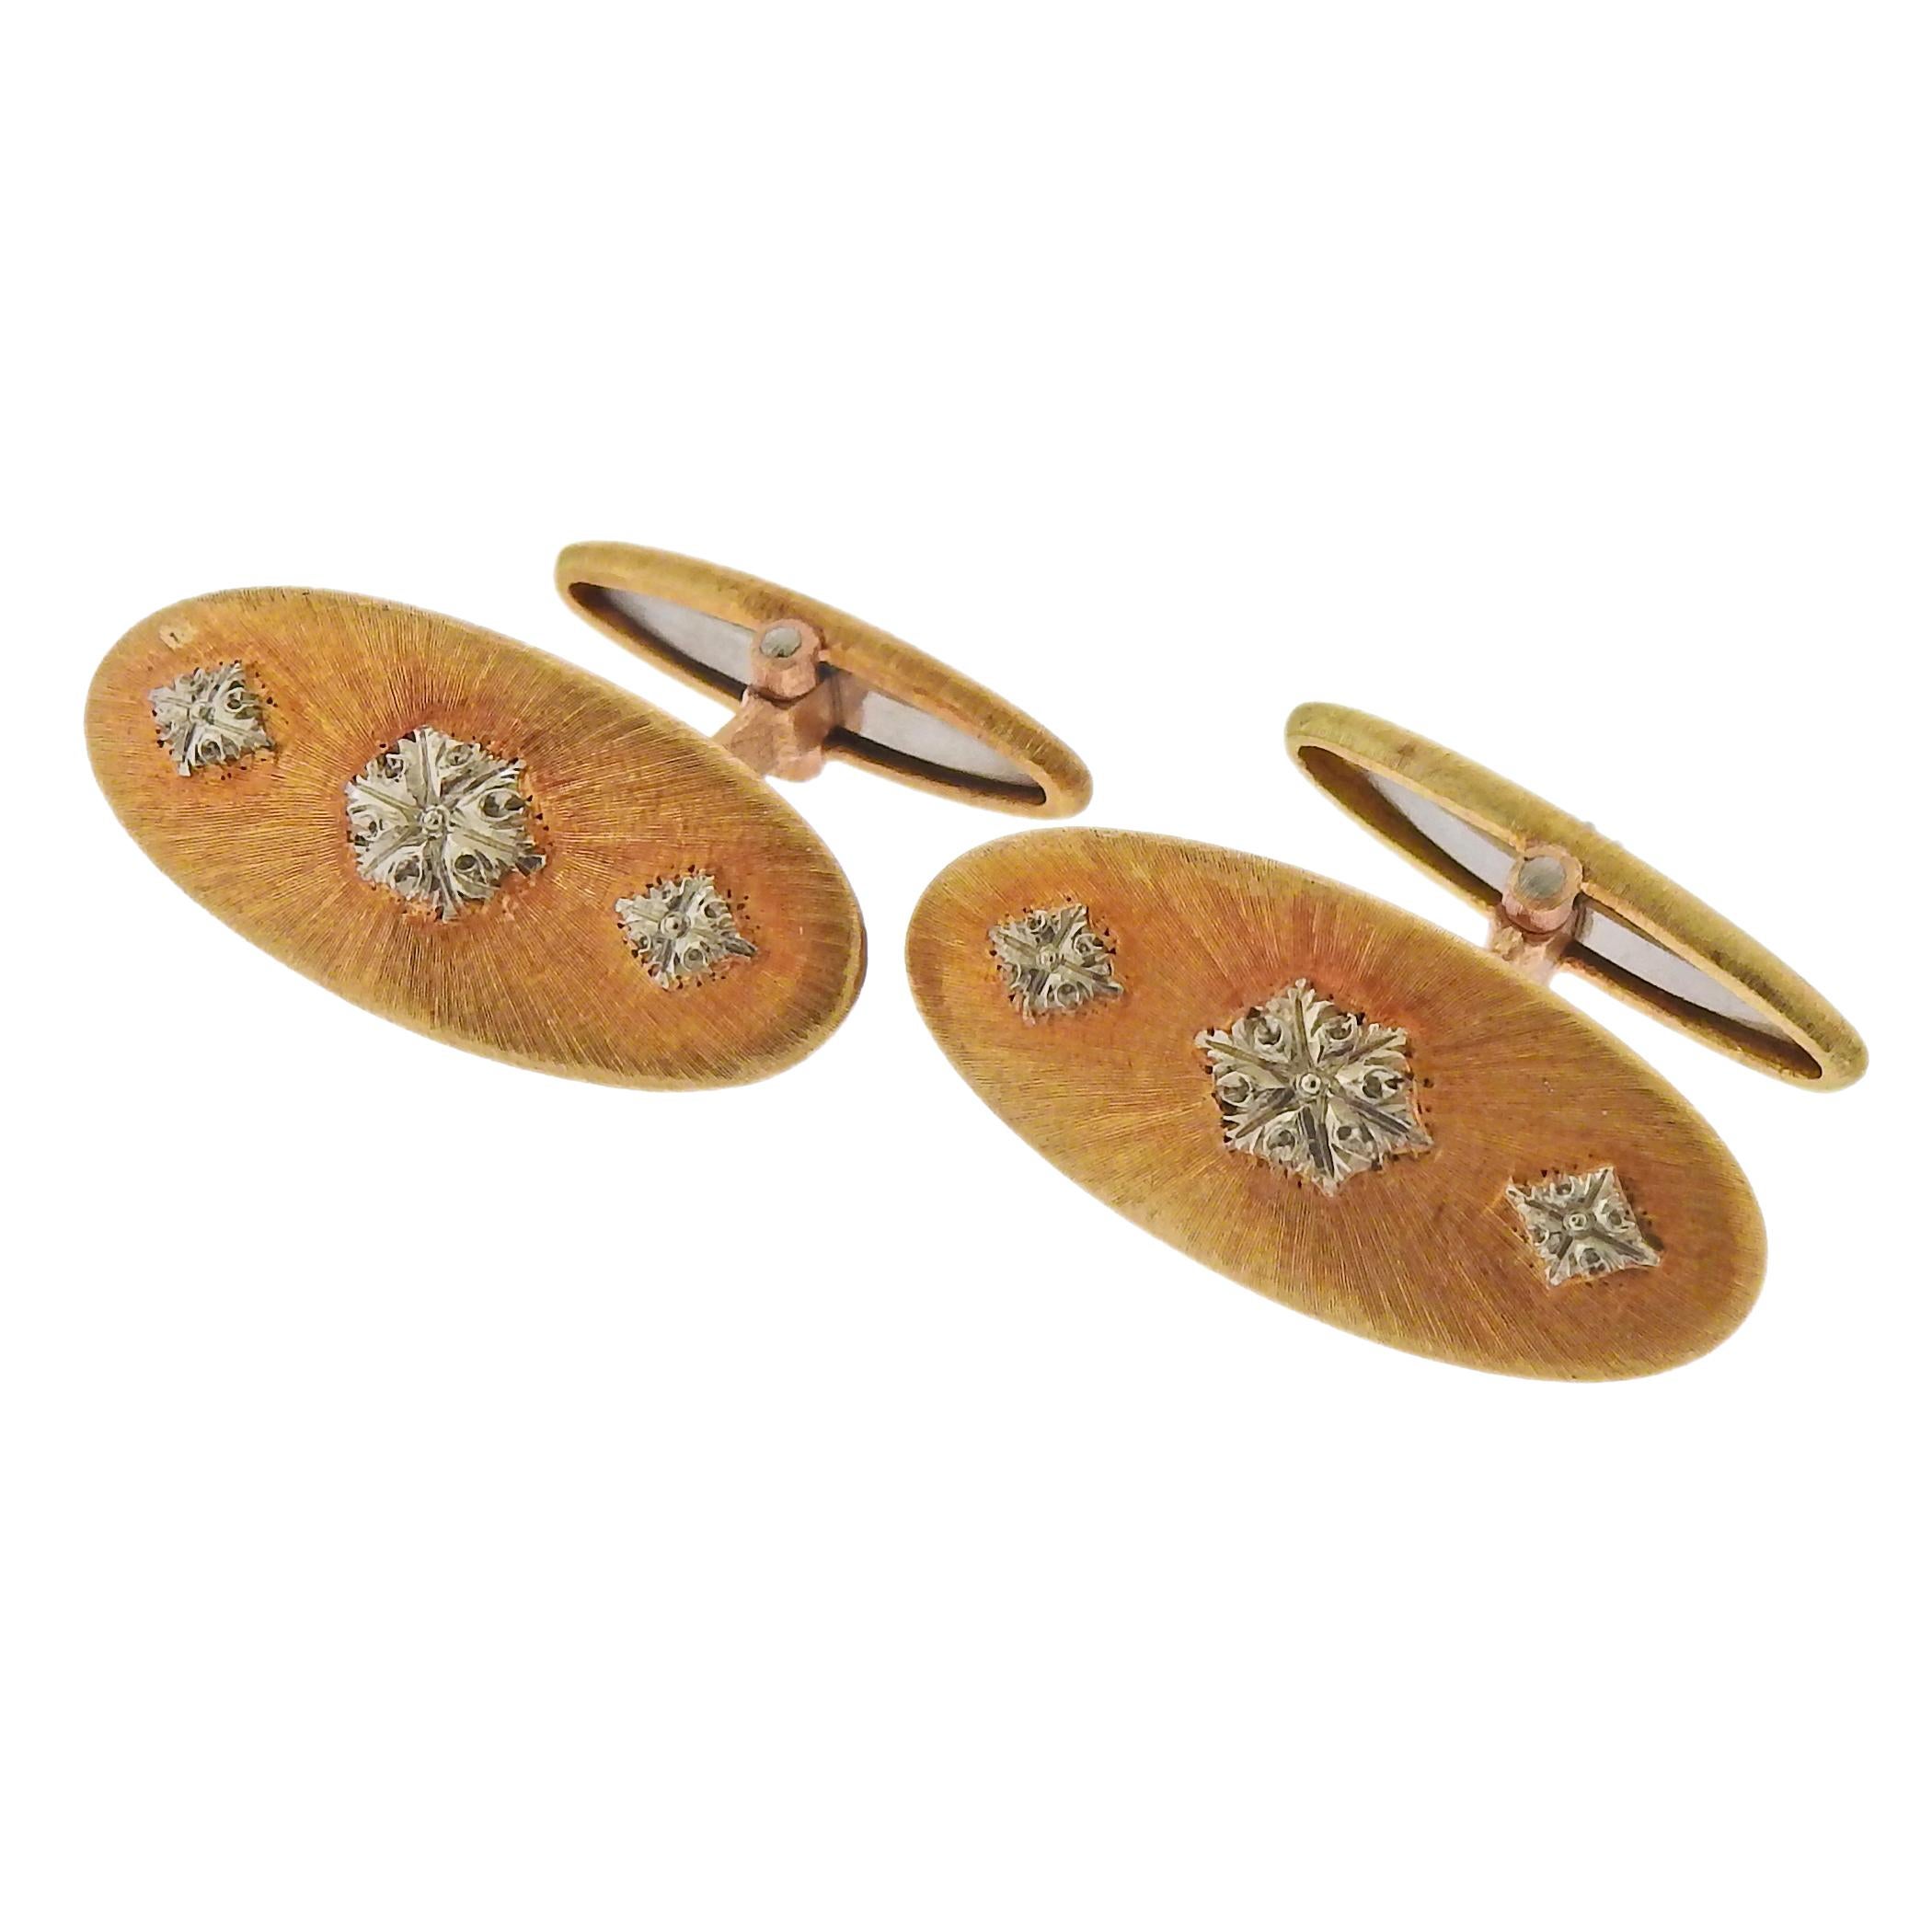 Pair of classic Buccellati 18k gold cufflinks. Come with  a pouch.  Cufflink top - 28mm x 11mm. Weight - 12.3 grams. Marked: Buccellati, Italy, 18k.